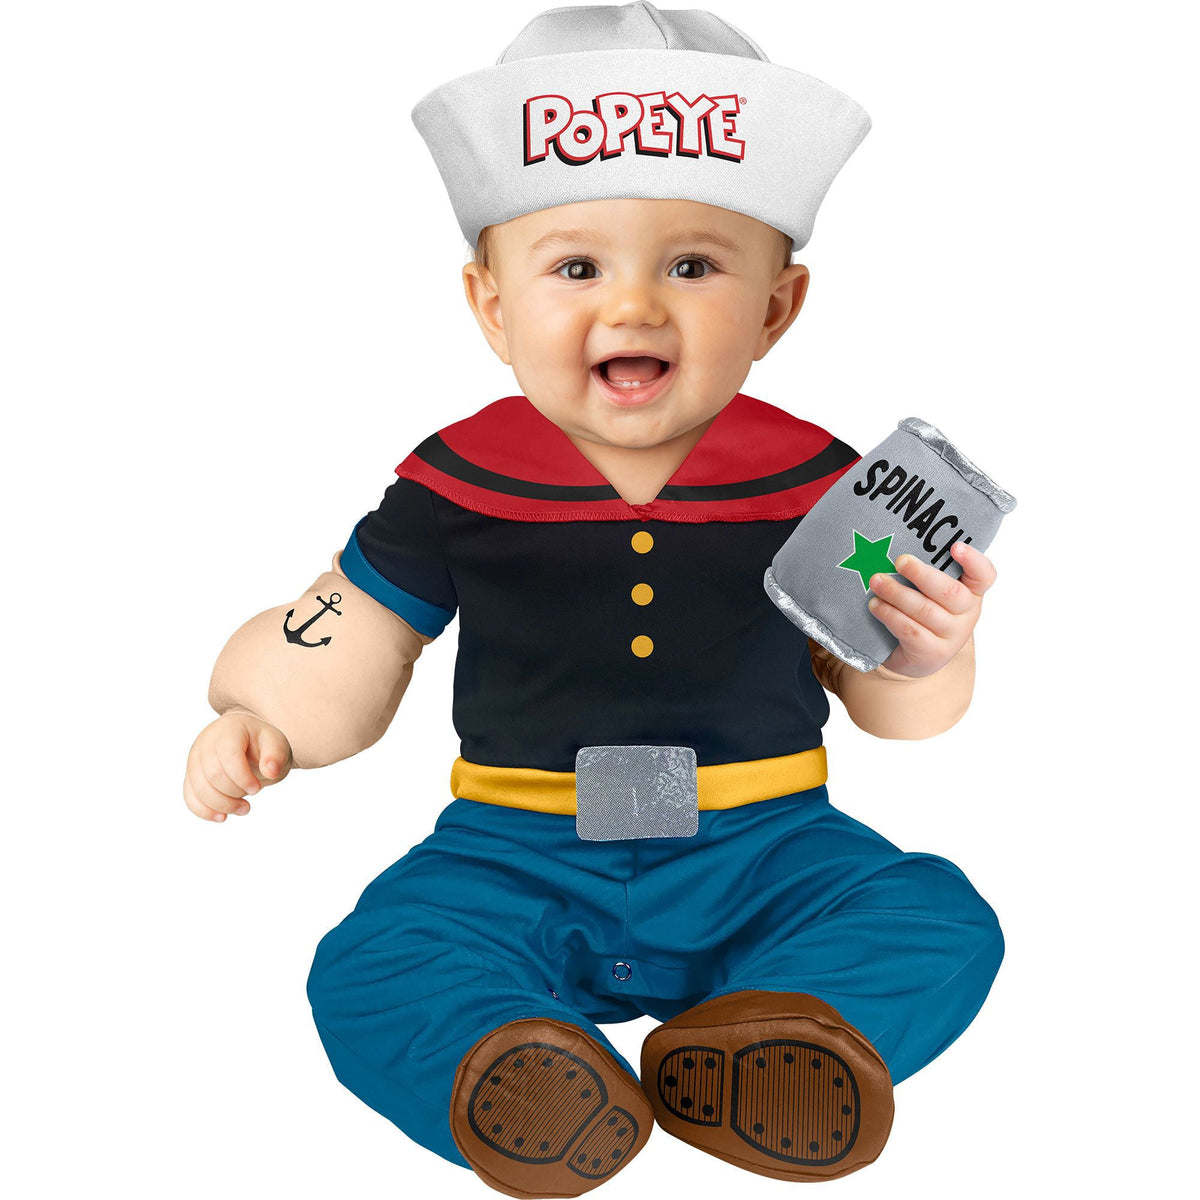 FUN WORLD Costumes Popeye Costume for Toddlers